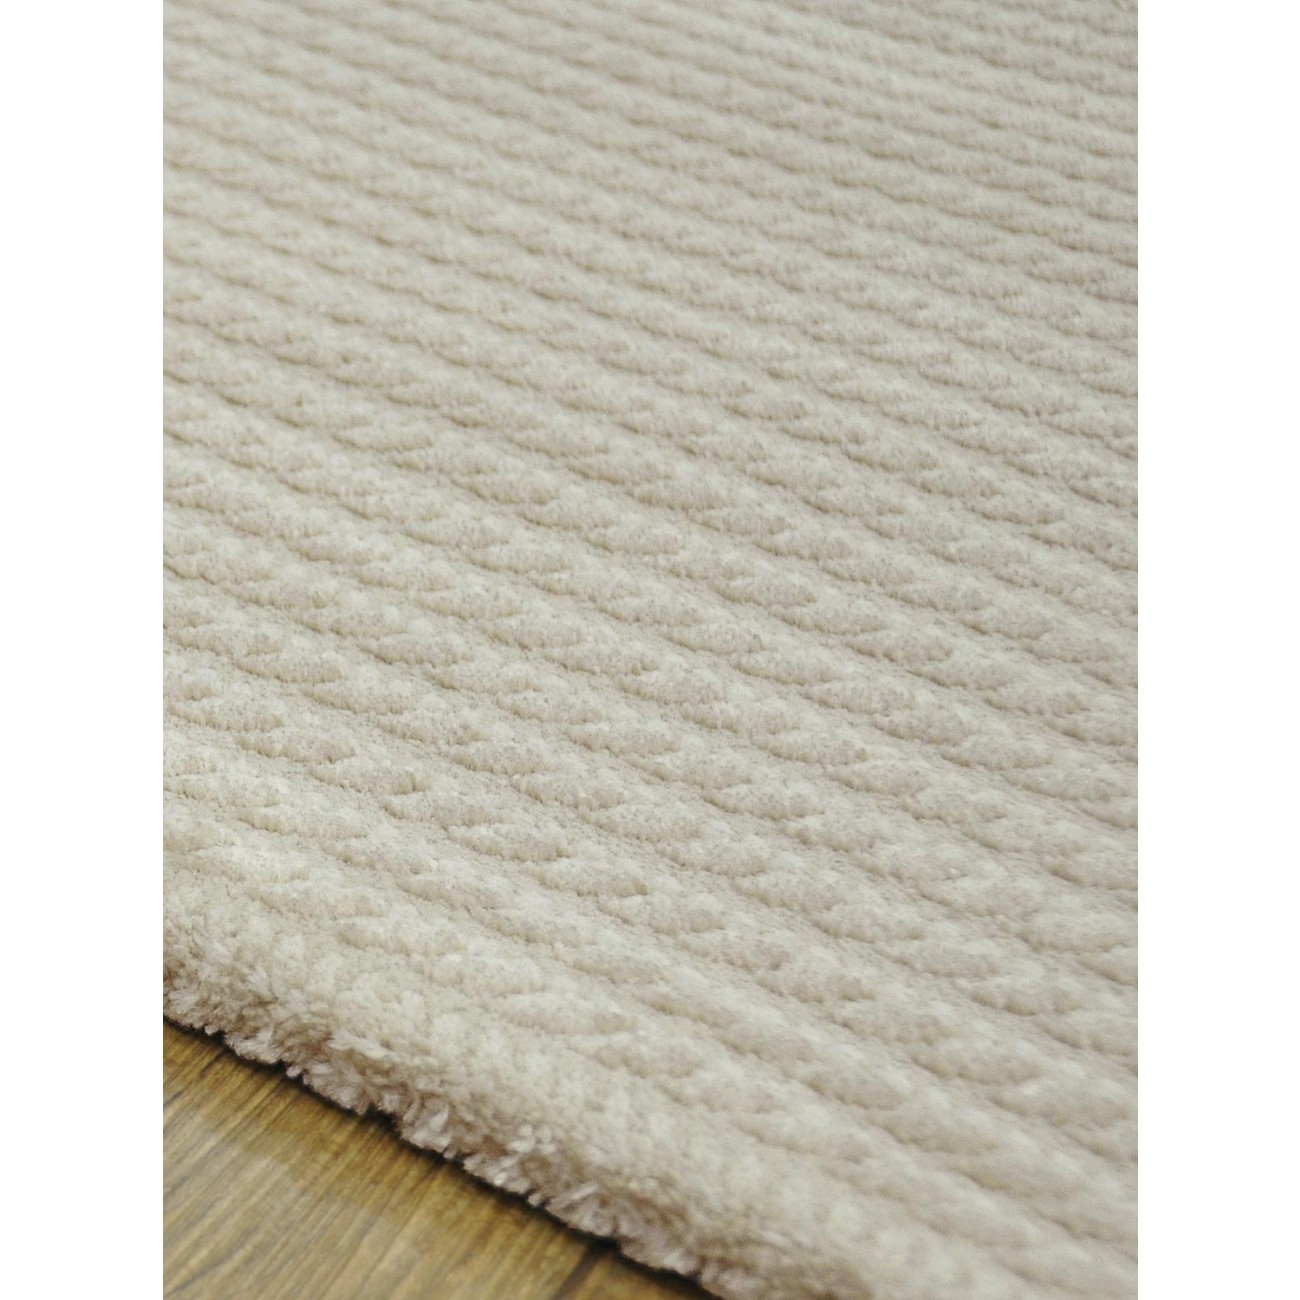 Tapete Grego Creme - 100x150